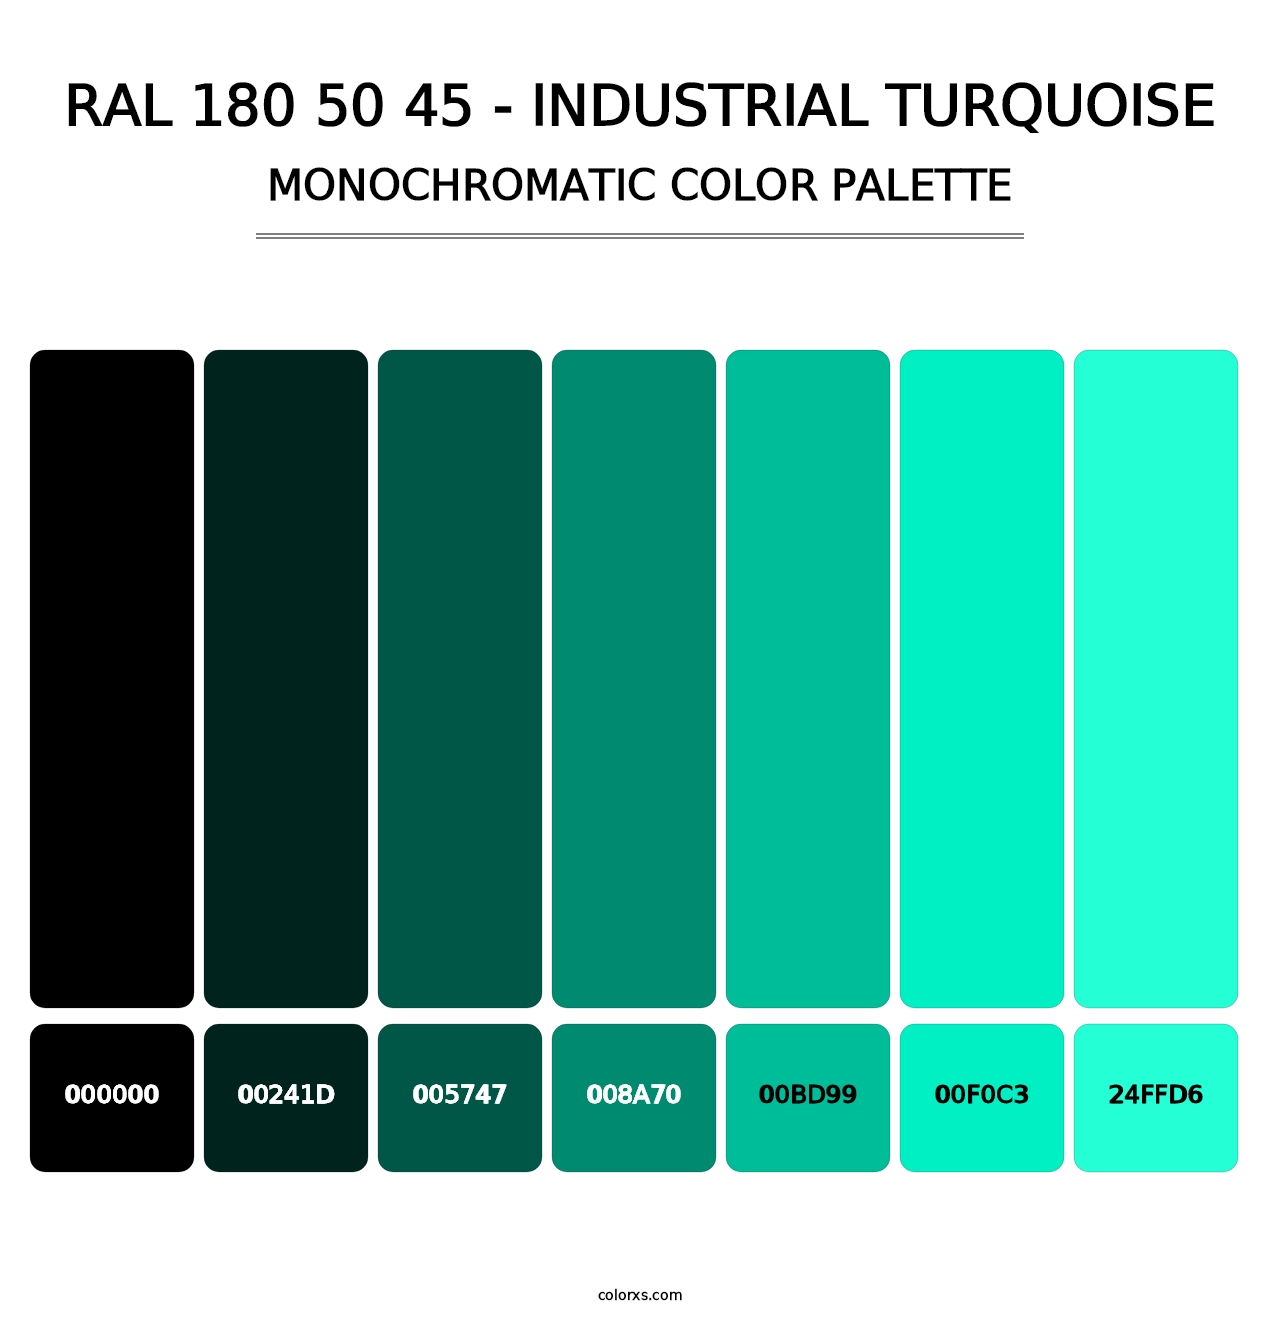 RAL 180 50 45 - Industrial Turquoise - Monochromatic Color Palette